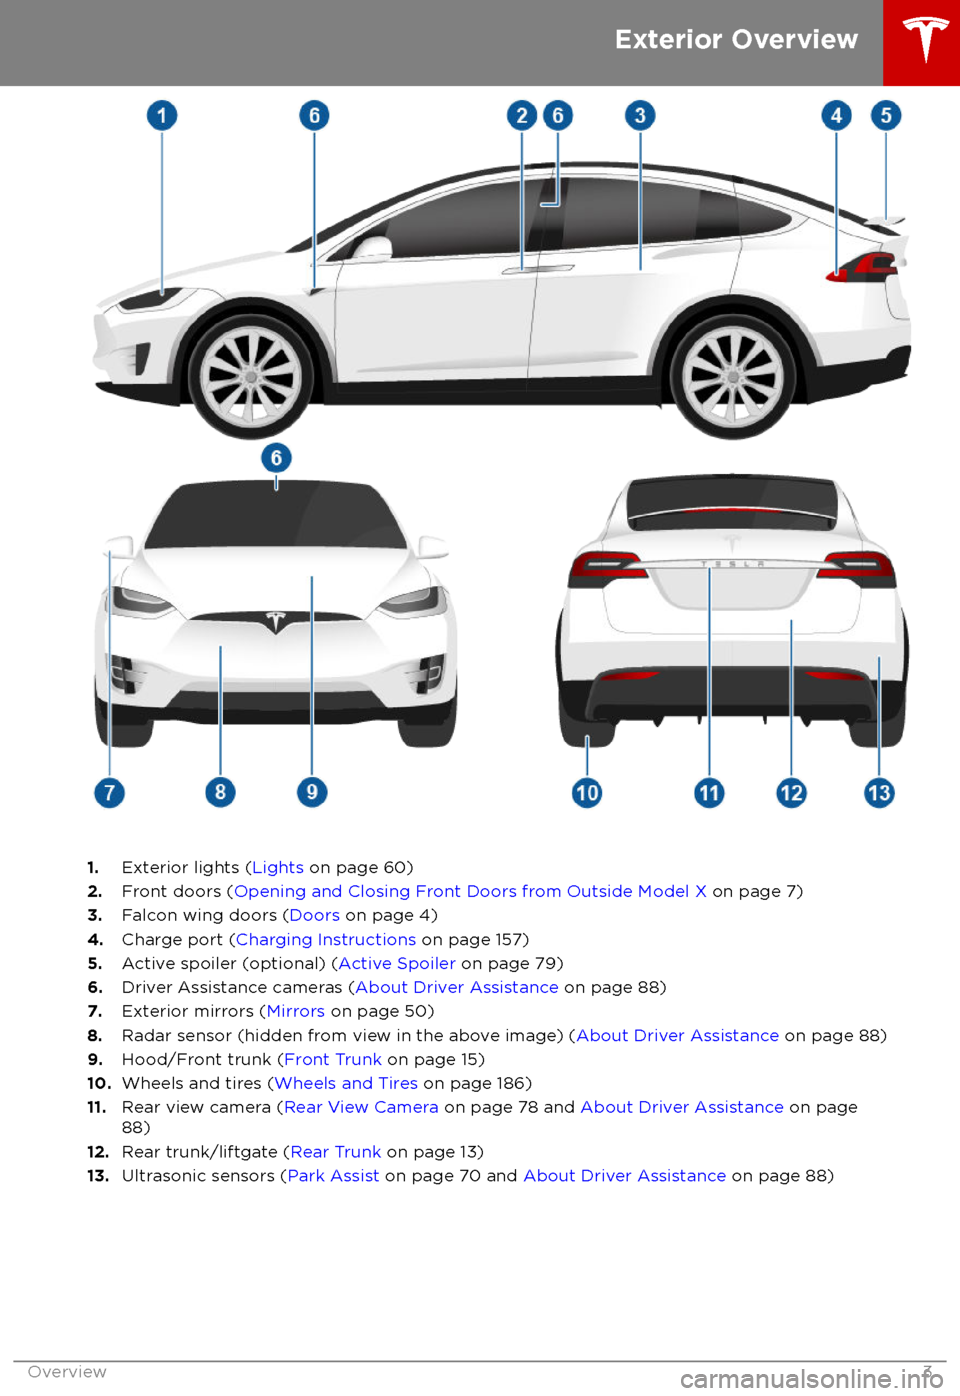 TESLA MODEL X 2018  Owners Manual  1.Exterior lights ( Lights on page 60)
2. Front doors ( Opening and Closing Front Doors from Outside Model X  on page 7)
3. Falcon wing doors ( Doors on page 4)
4. Charge port ( Charging Instructions 